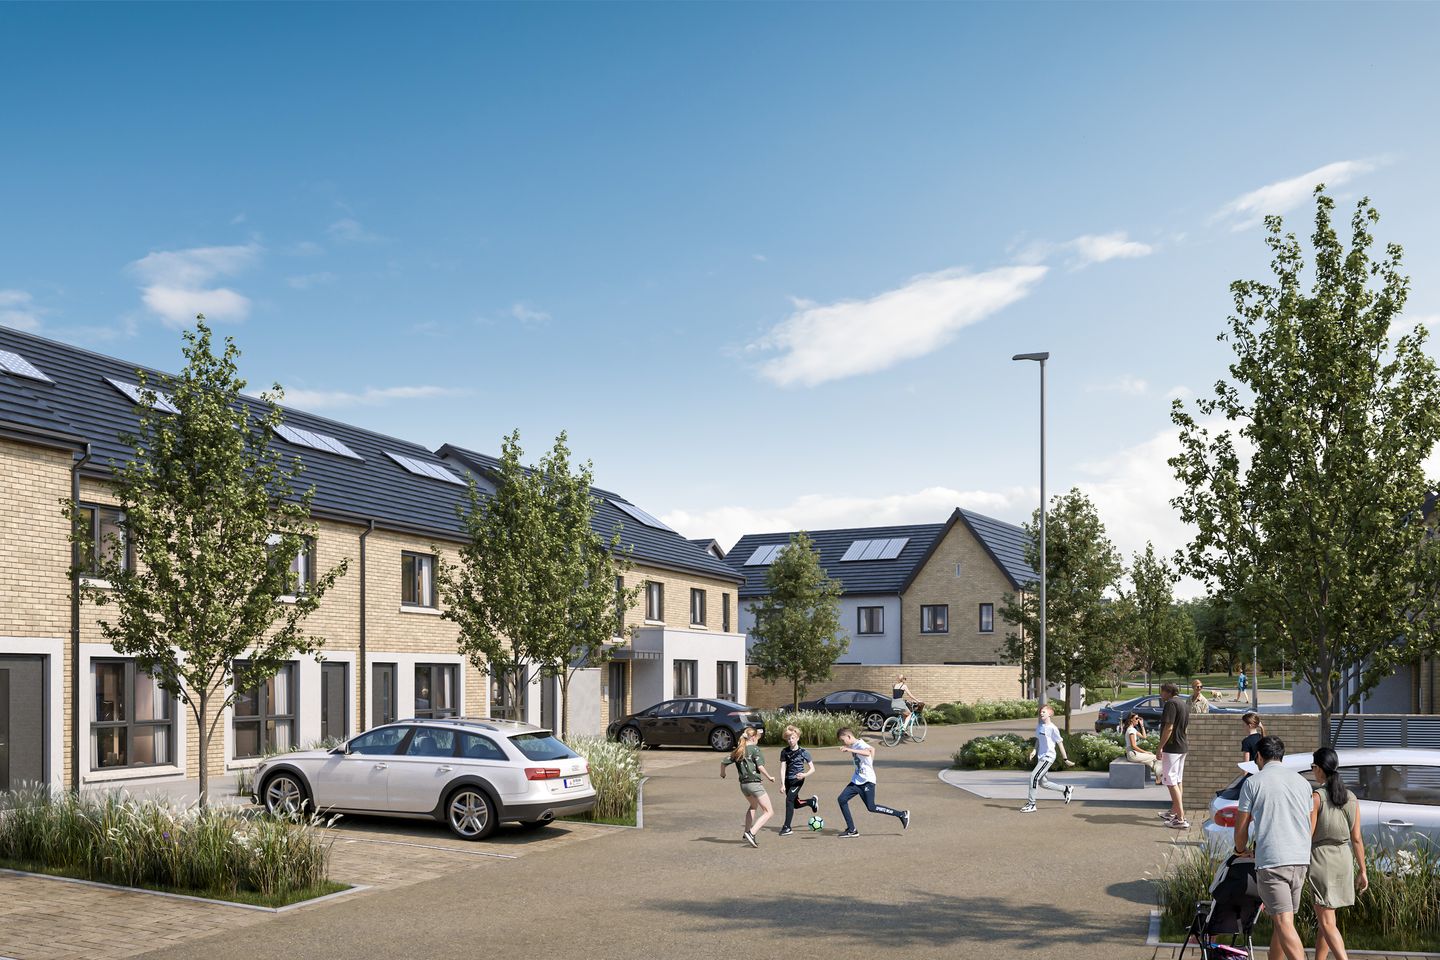 Two Bedroom Homes, Hereford Park, Hereford Park , Leixlip, Co. Kildare